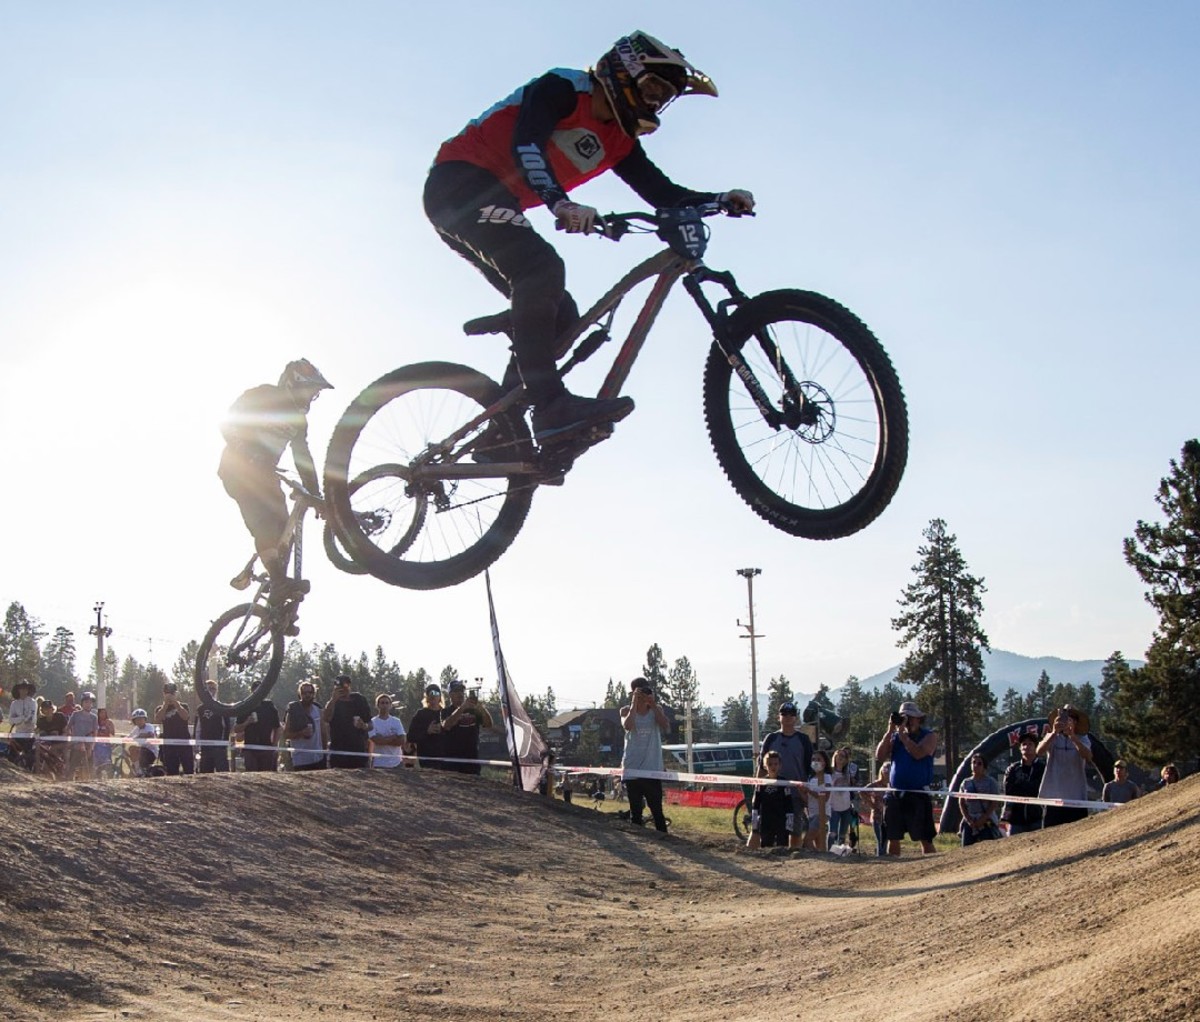 Two bike racers jump high above the course.